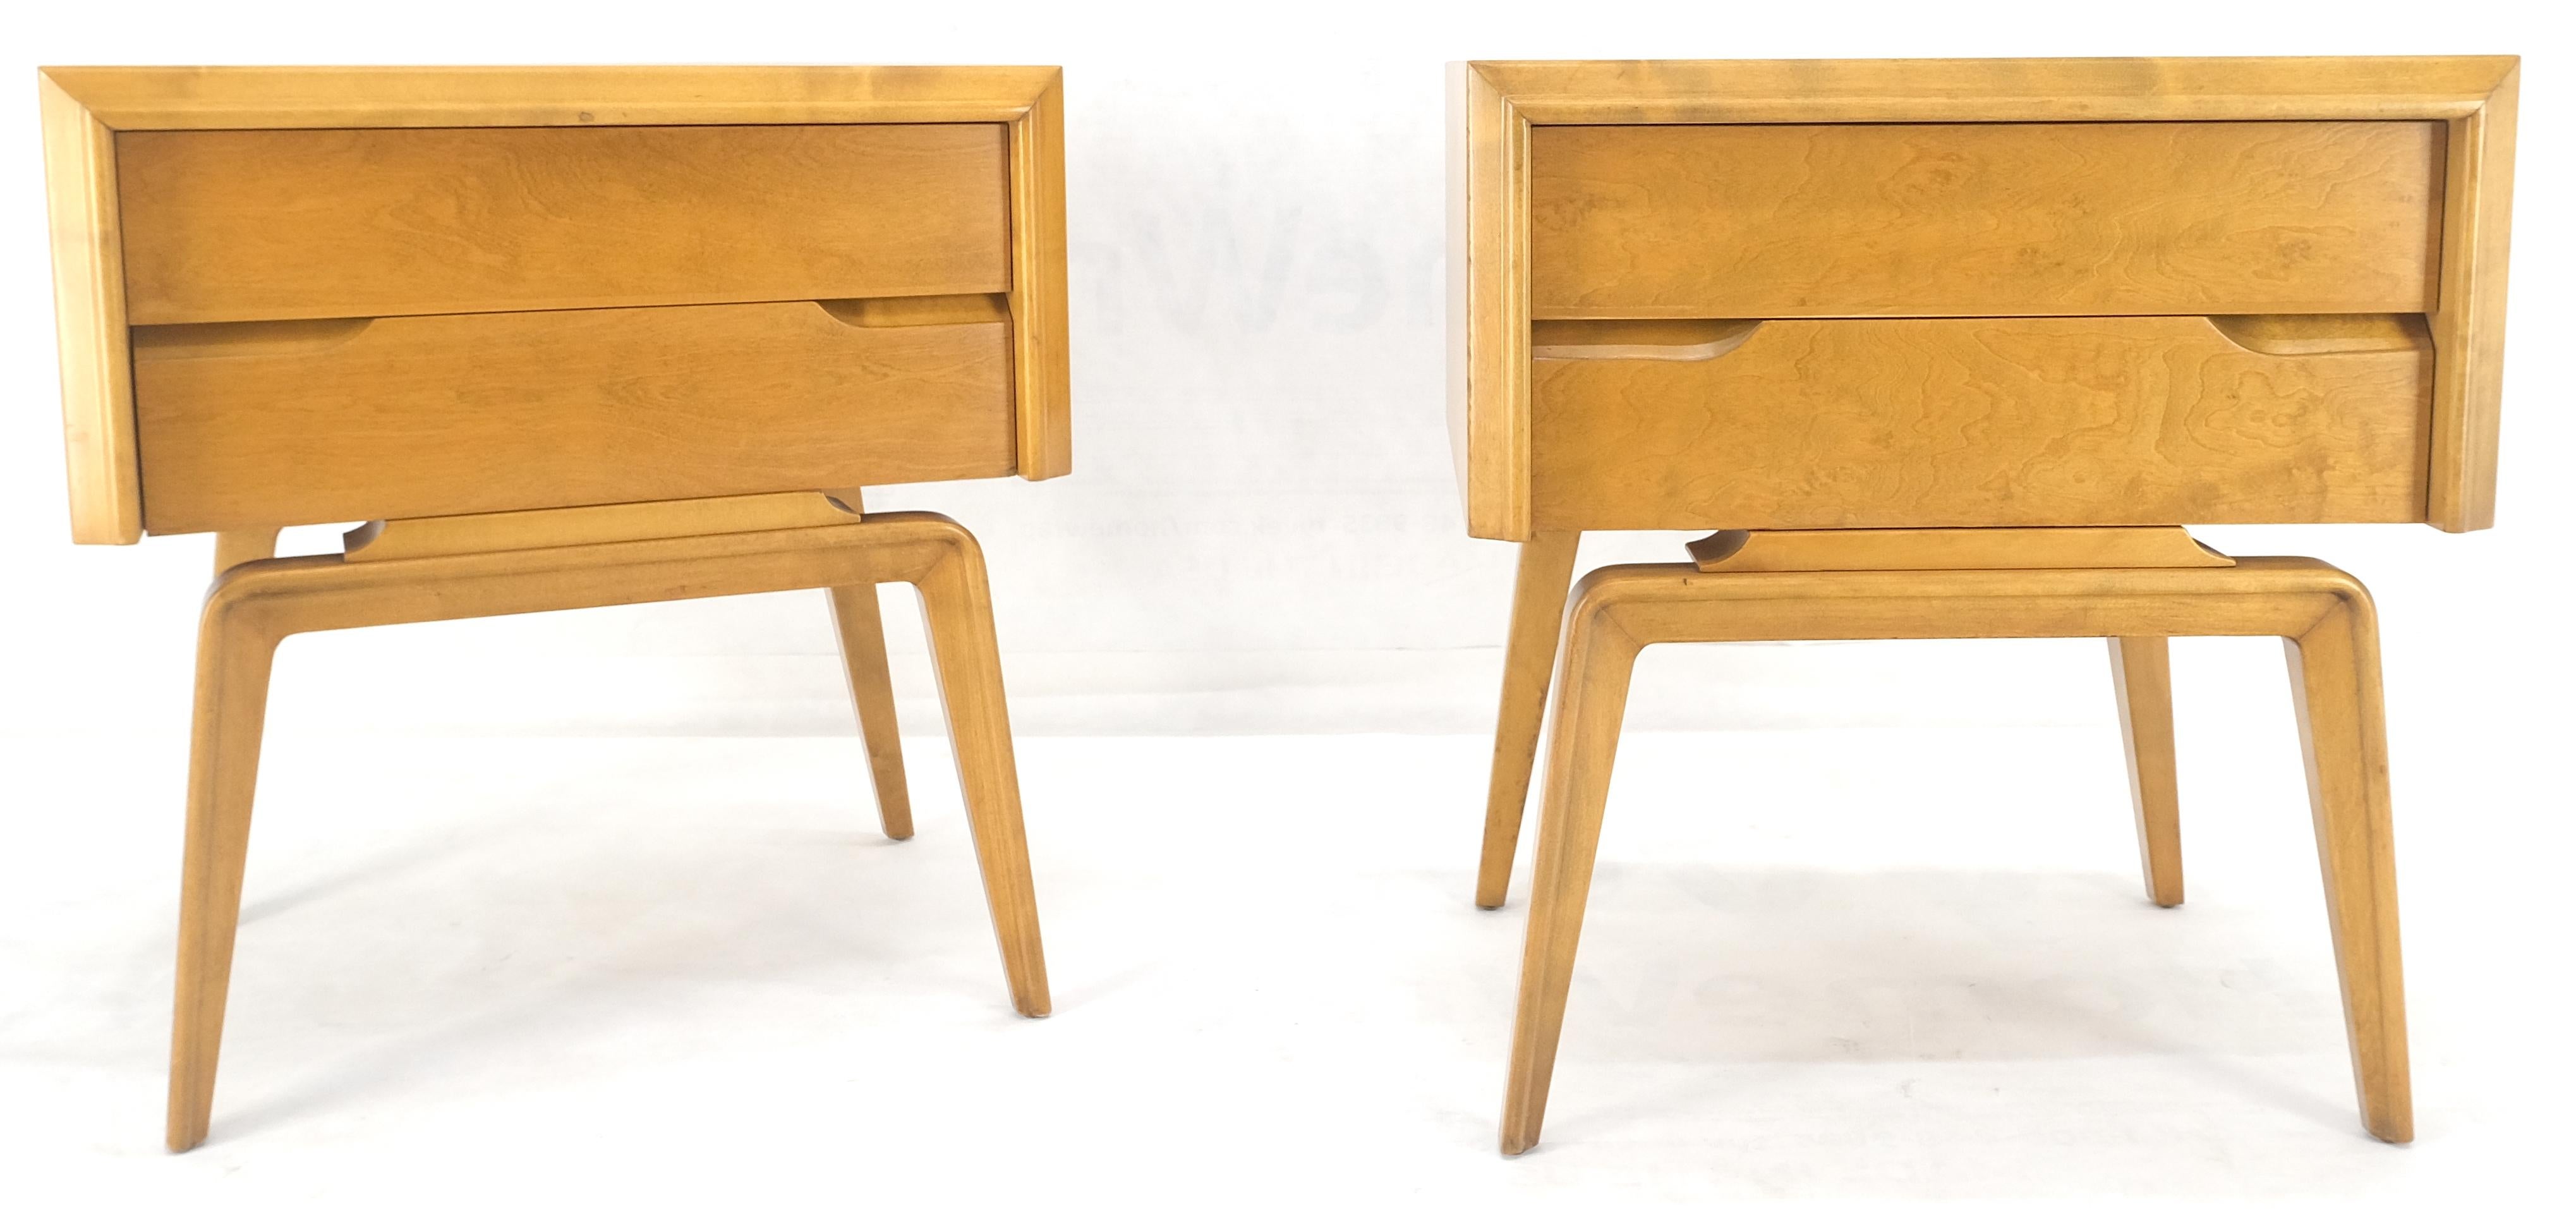 Pair Swedish Edmund Spence 2 Drawer Blond Birch Night Bed Stands Cabinets MINT! For Sale 6